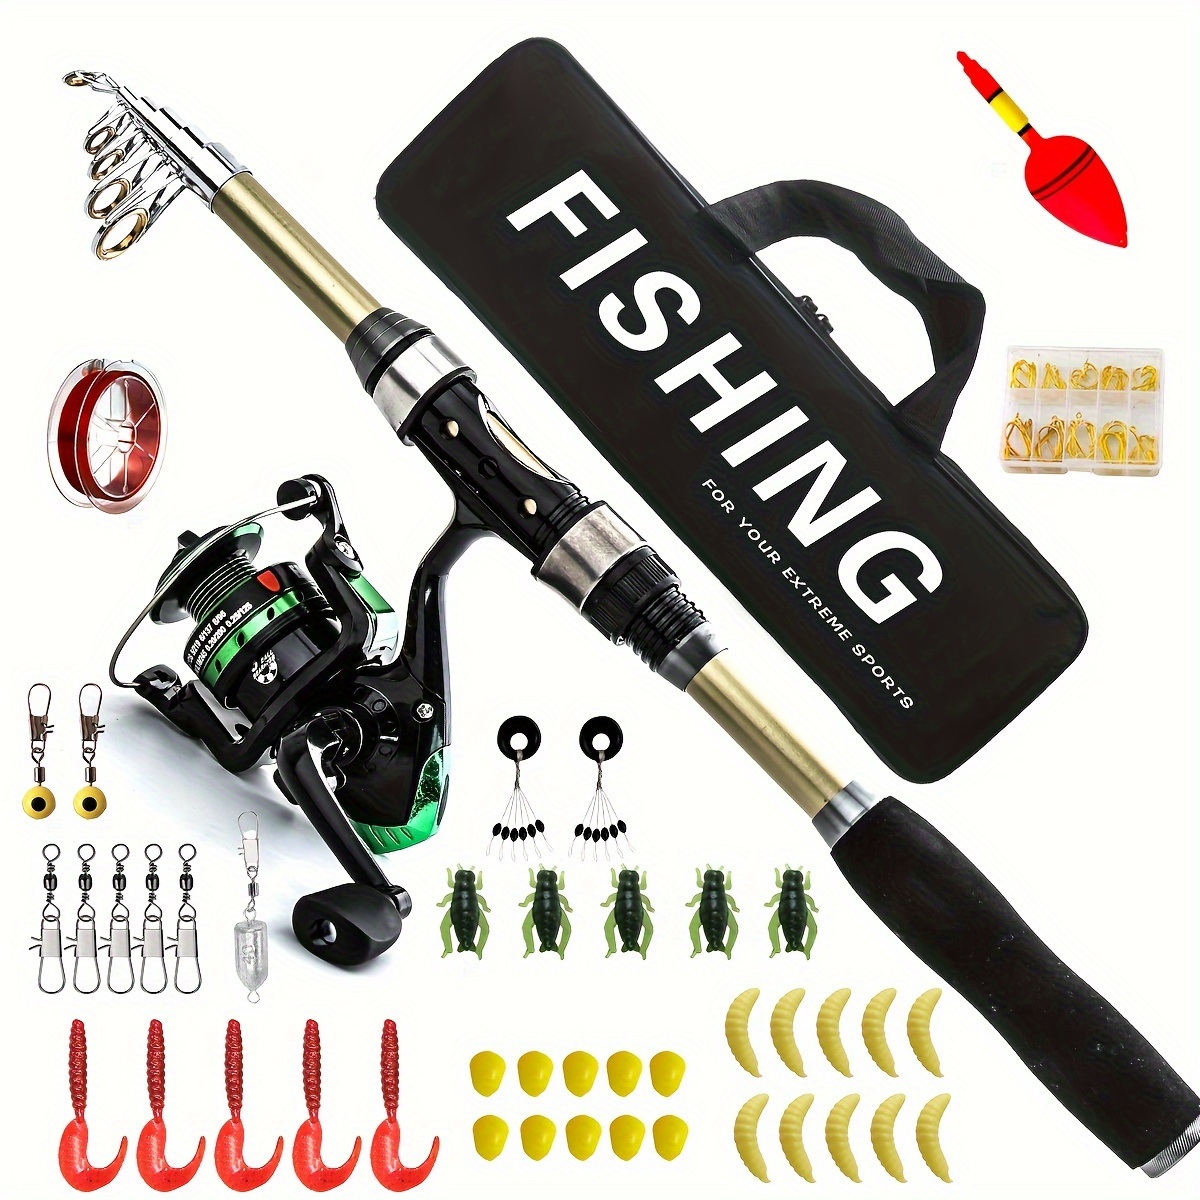 Compact And Portable Fishing Rod: Mini Hand Rod, Telescopic Fishing Rod For  Salt Water And Freshwater